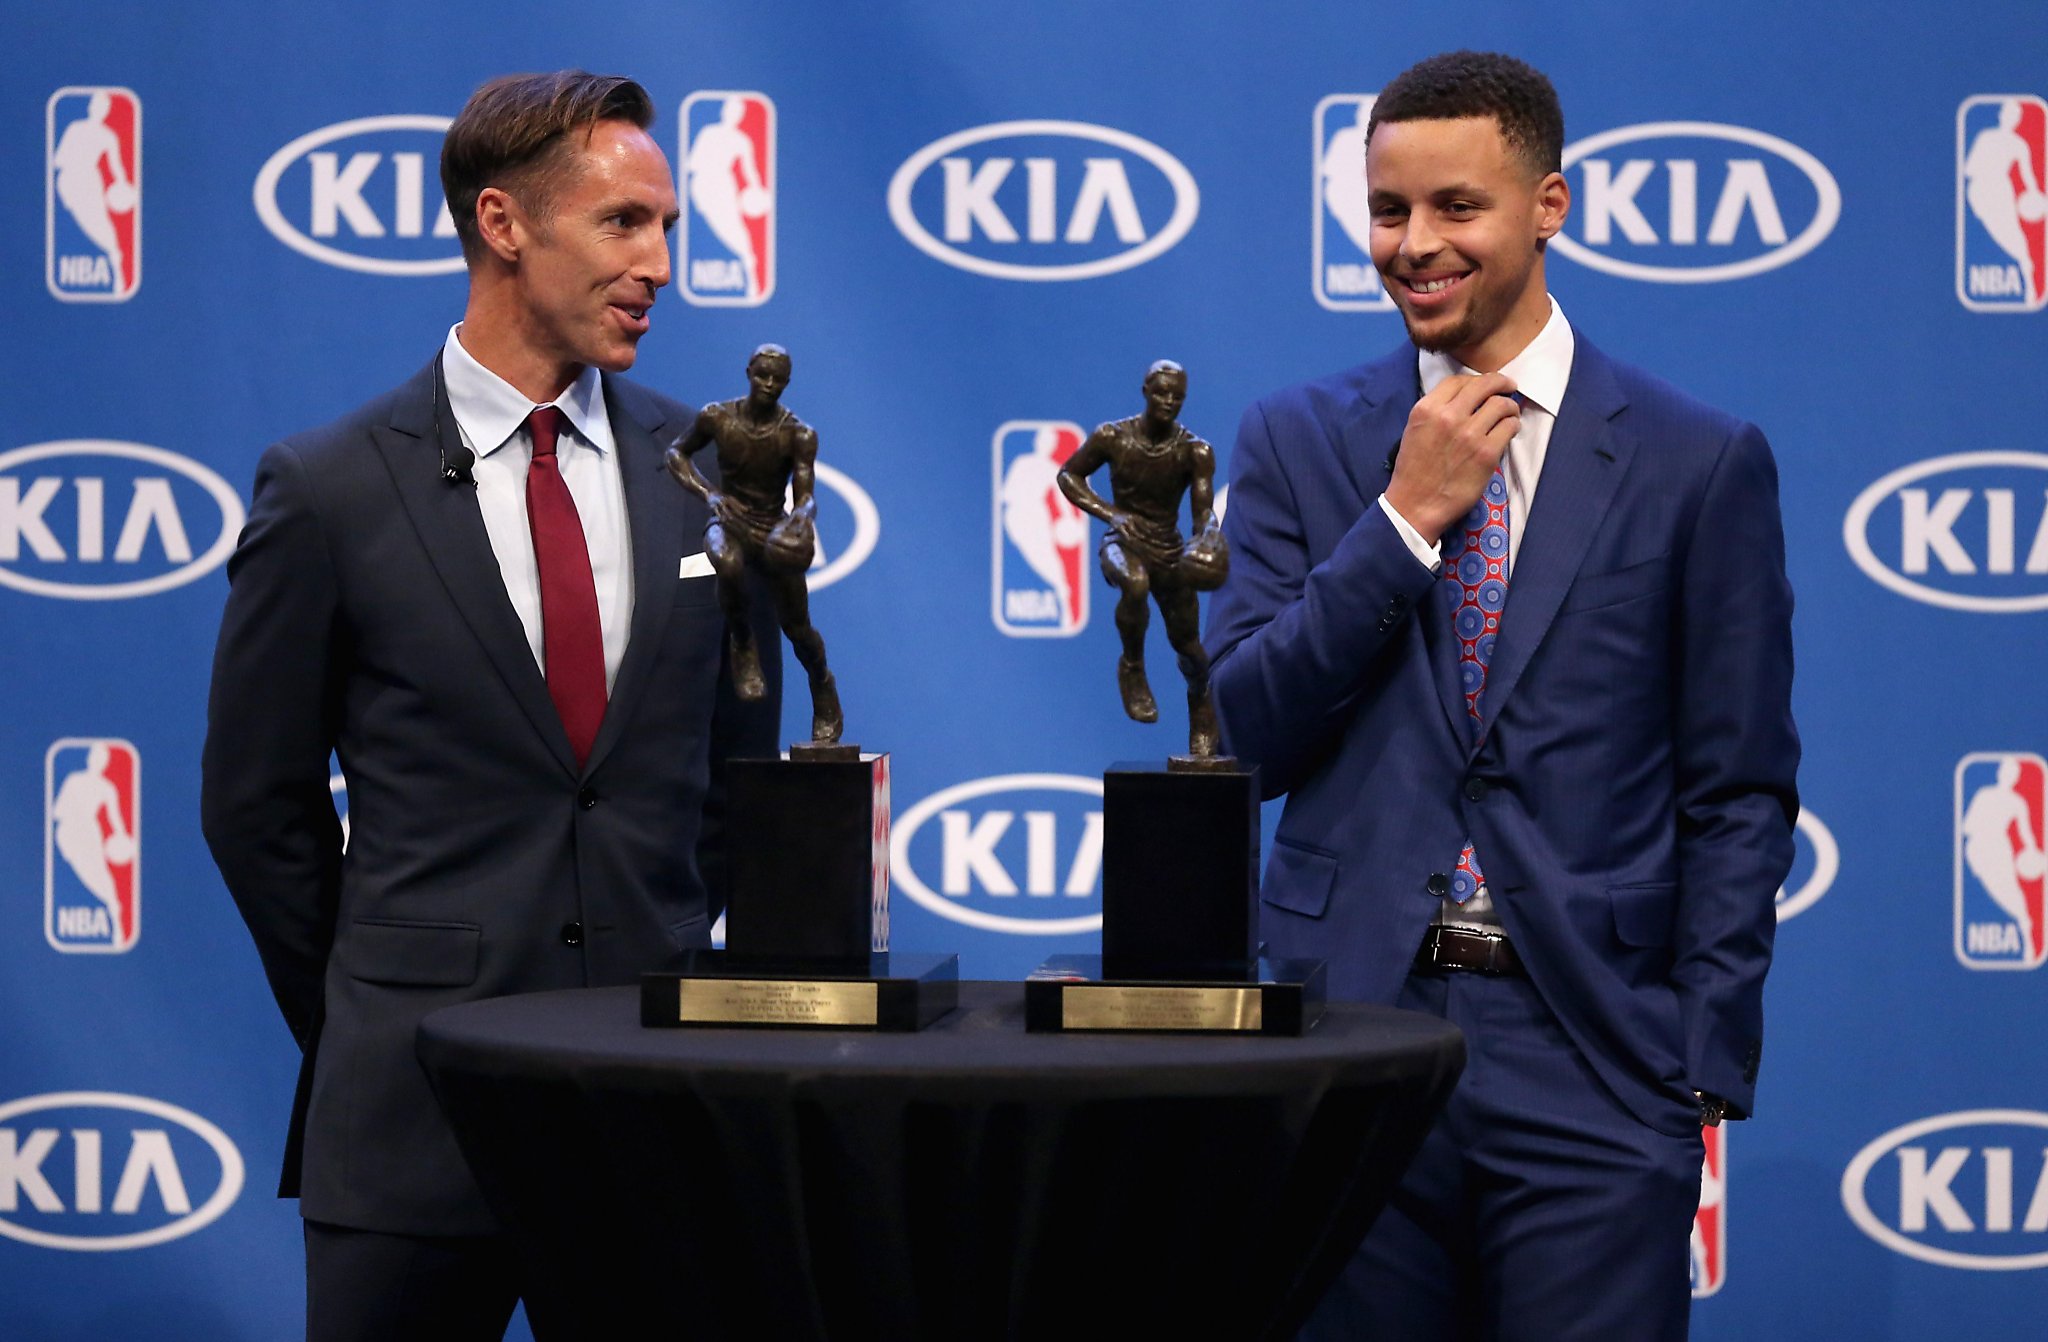 Stephen Curry makes history 1st unanimous MVP